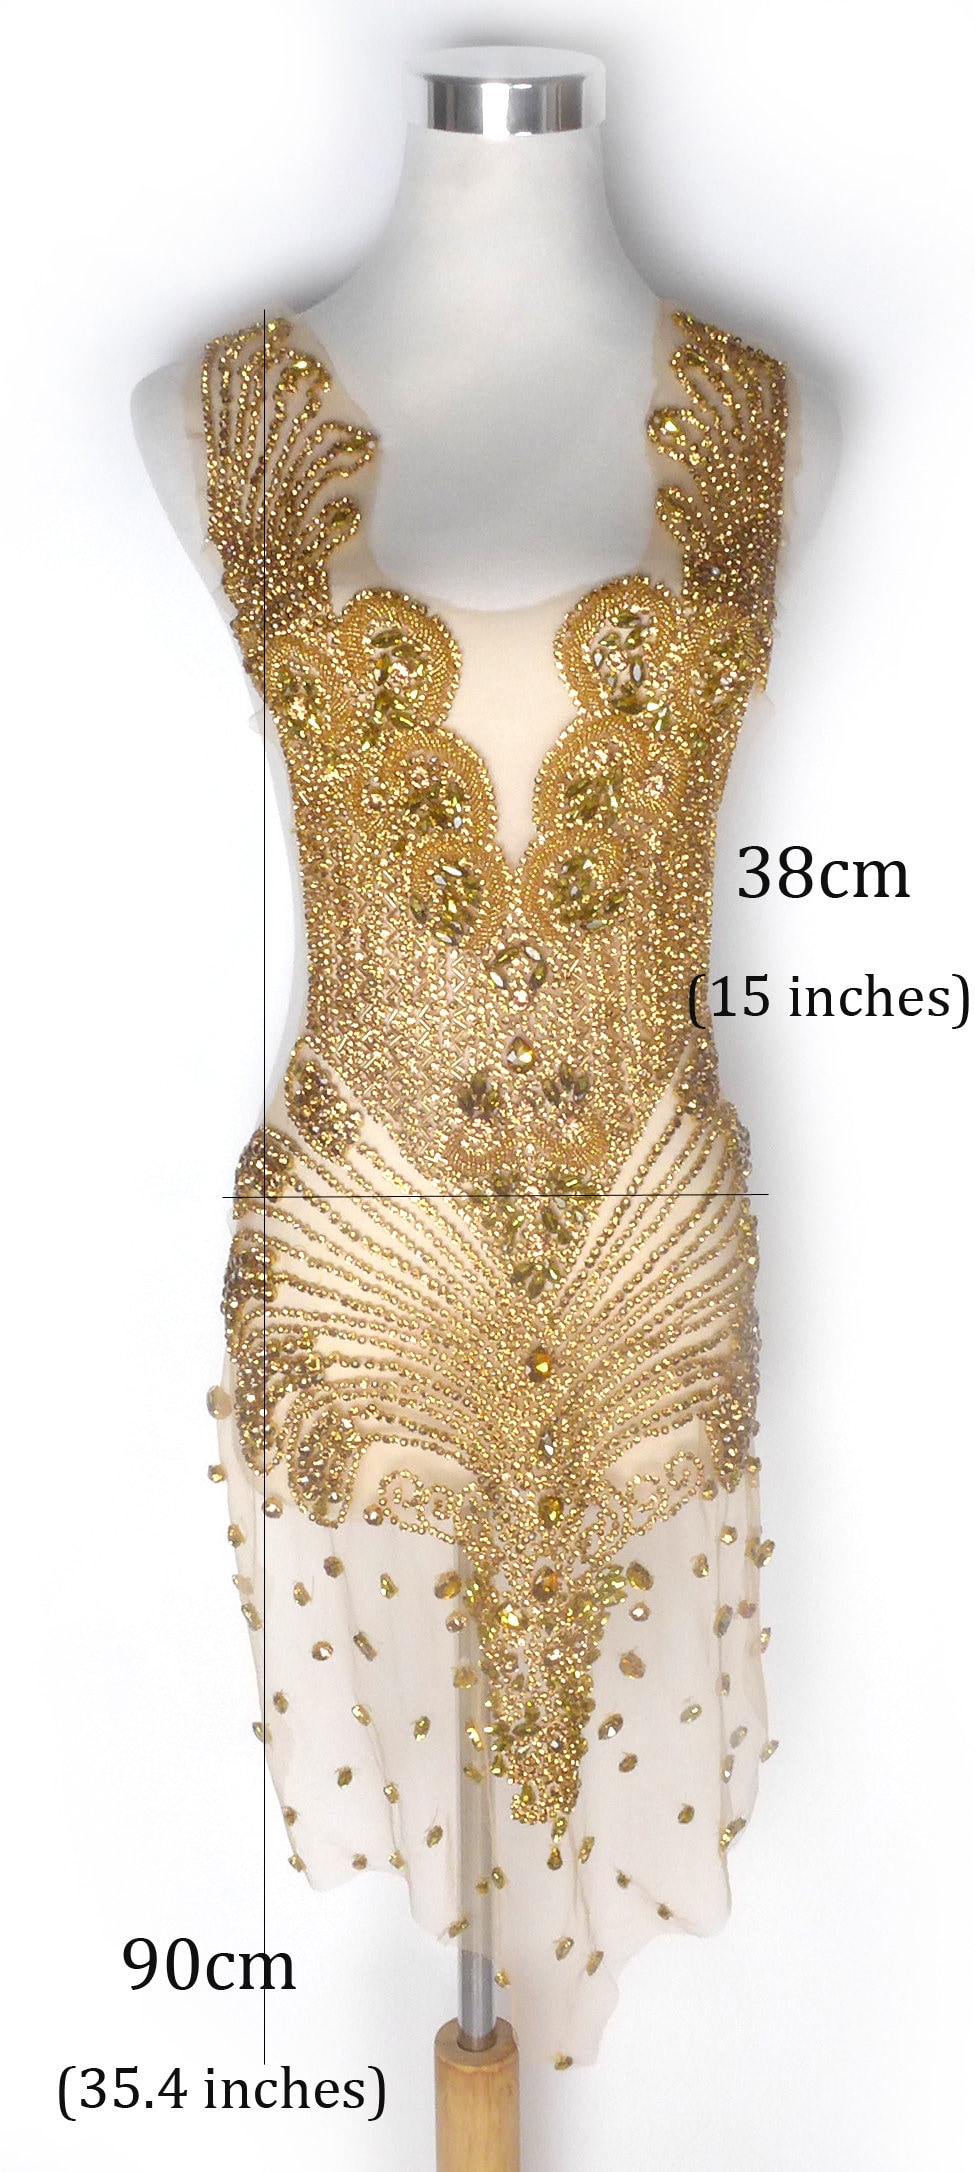  La Belleza Rose Gold Rhinestones Handmade Beautiful Large  Bodice Applique Patch with Glass Crystal and Beads for Dresses 25.6 x15.7  by Piece : Arts, Crafts & Sewing